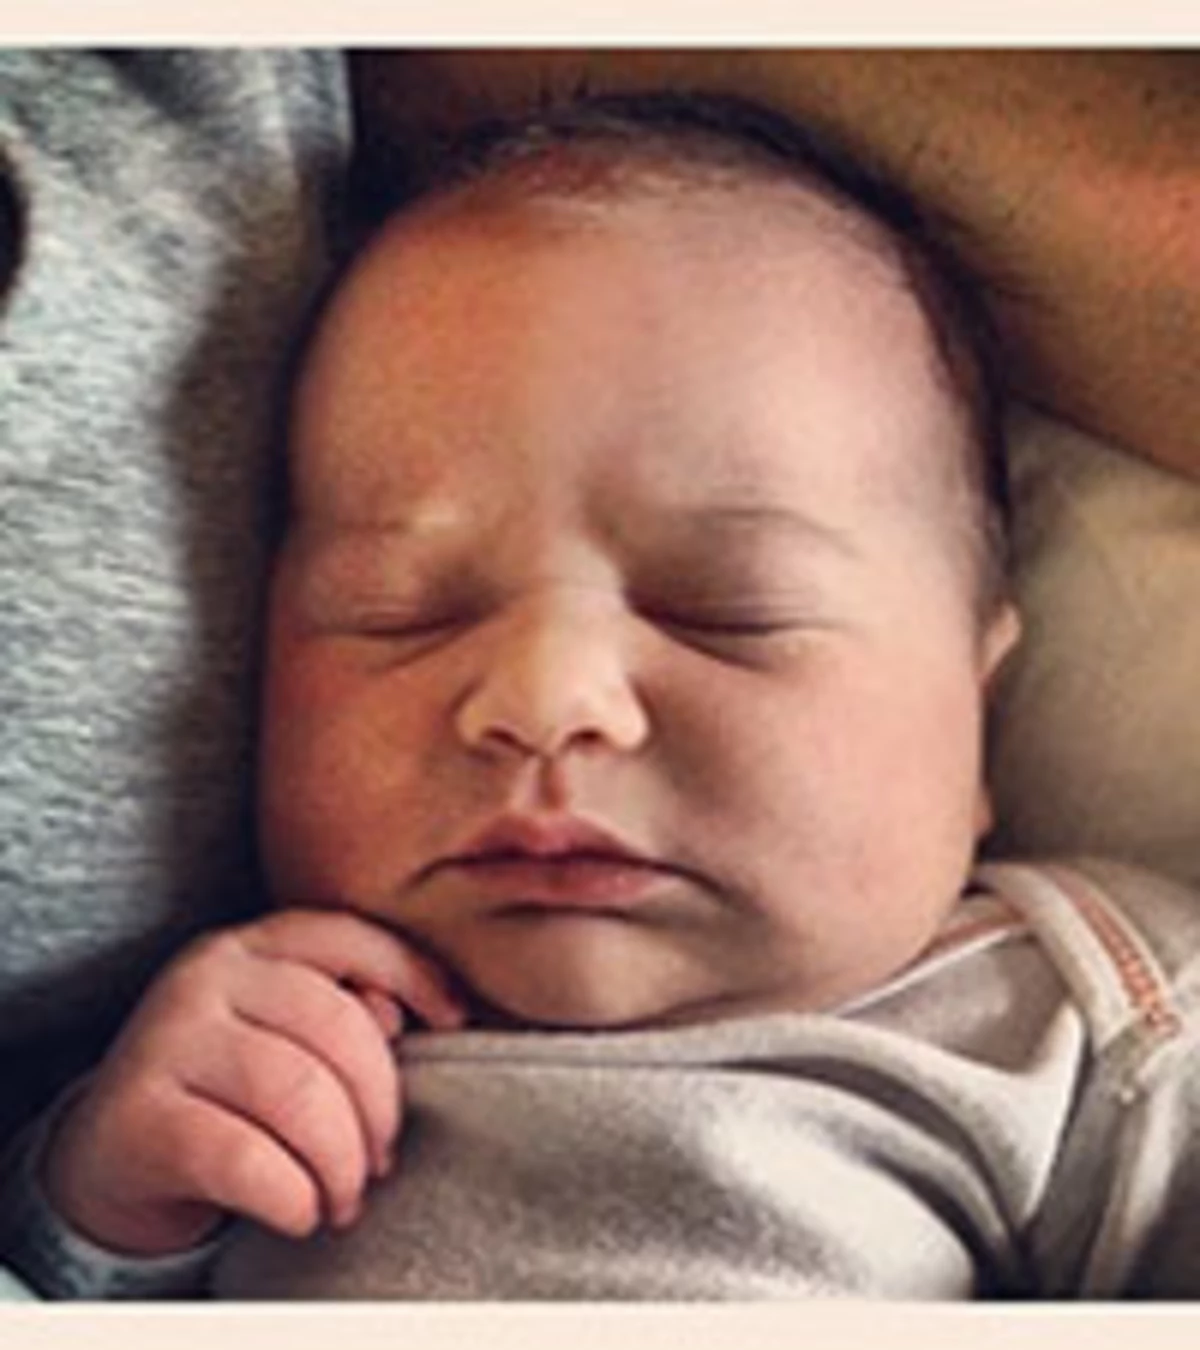 JT Hodges' Baby: Singer Shows Off Daughter — PHOTO